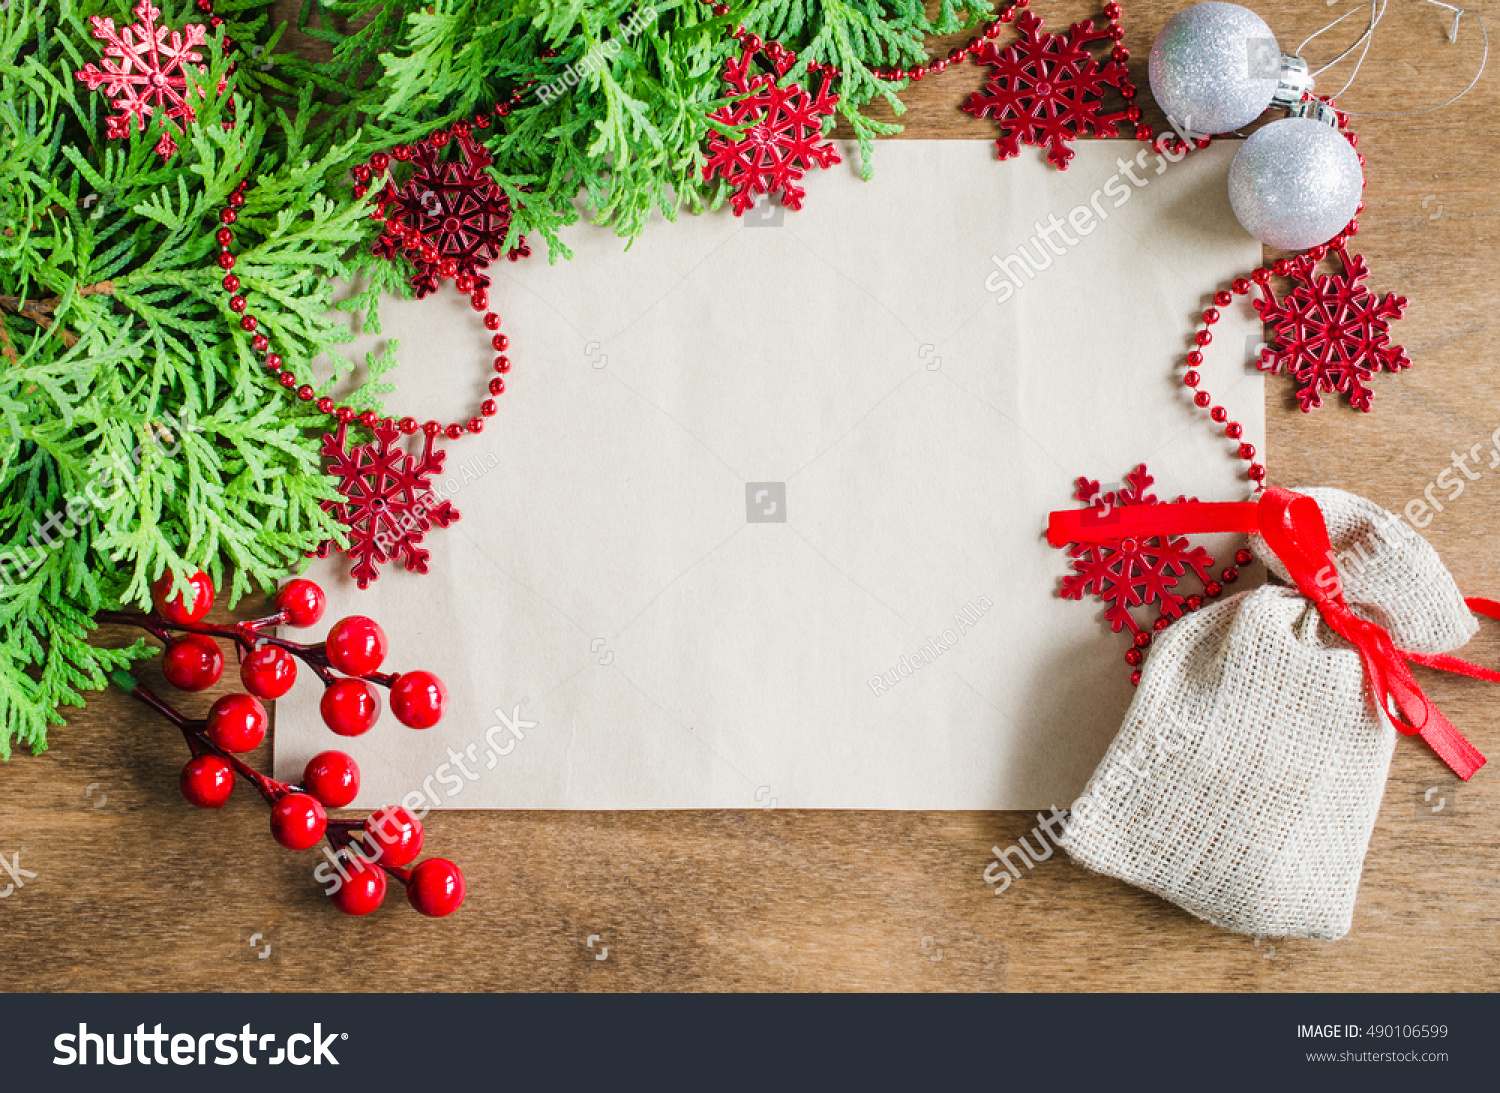 Christmas Background With Xmas Decoration, Blank Postcard On Wooden ...